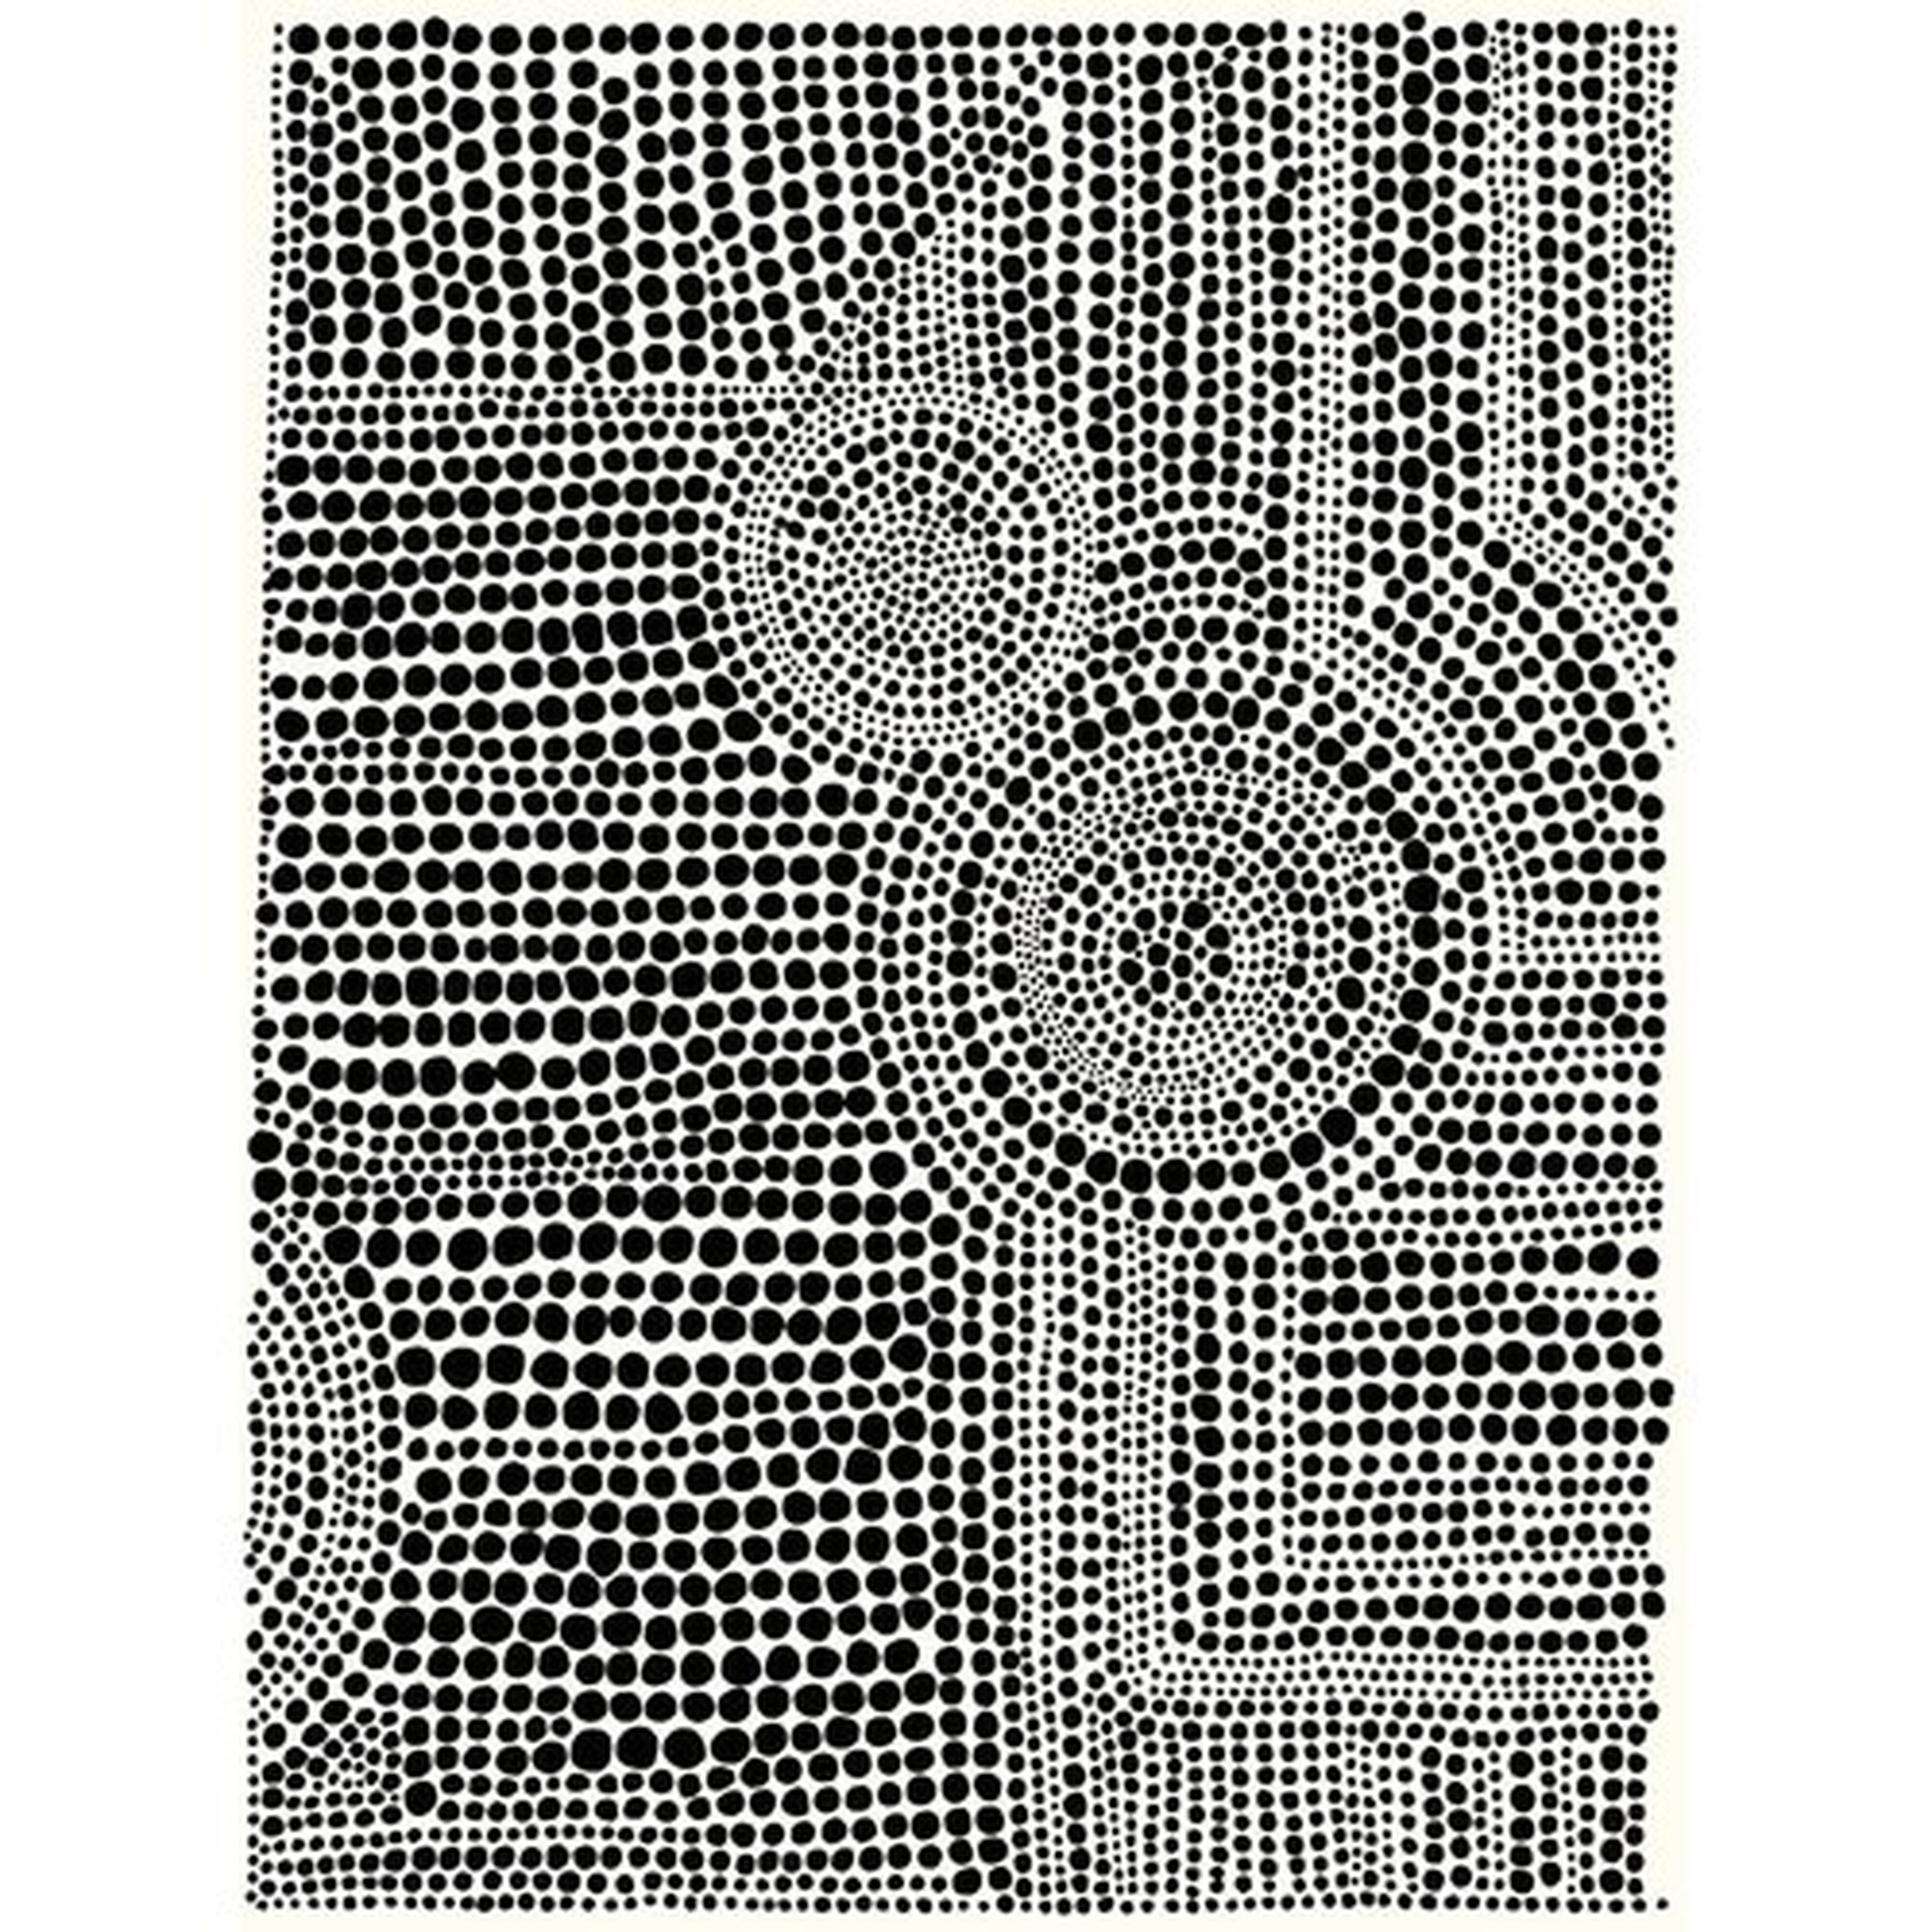 CLUSTERED DOTS A' GRAPHIC ART PRINT ON WRAPPED CANVAS - Perigold